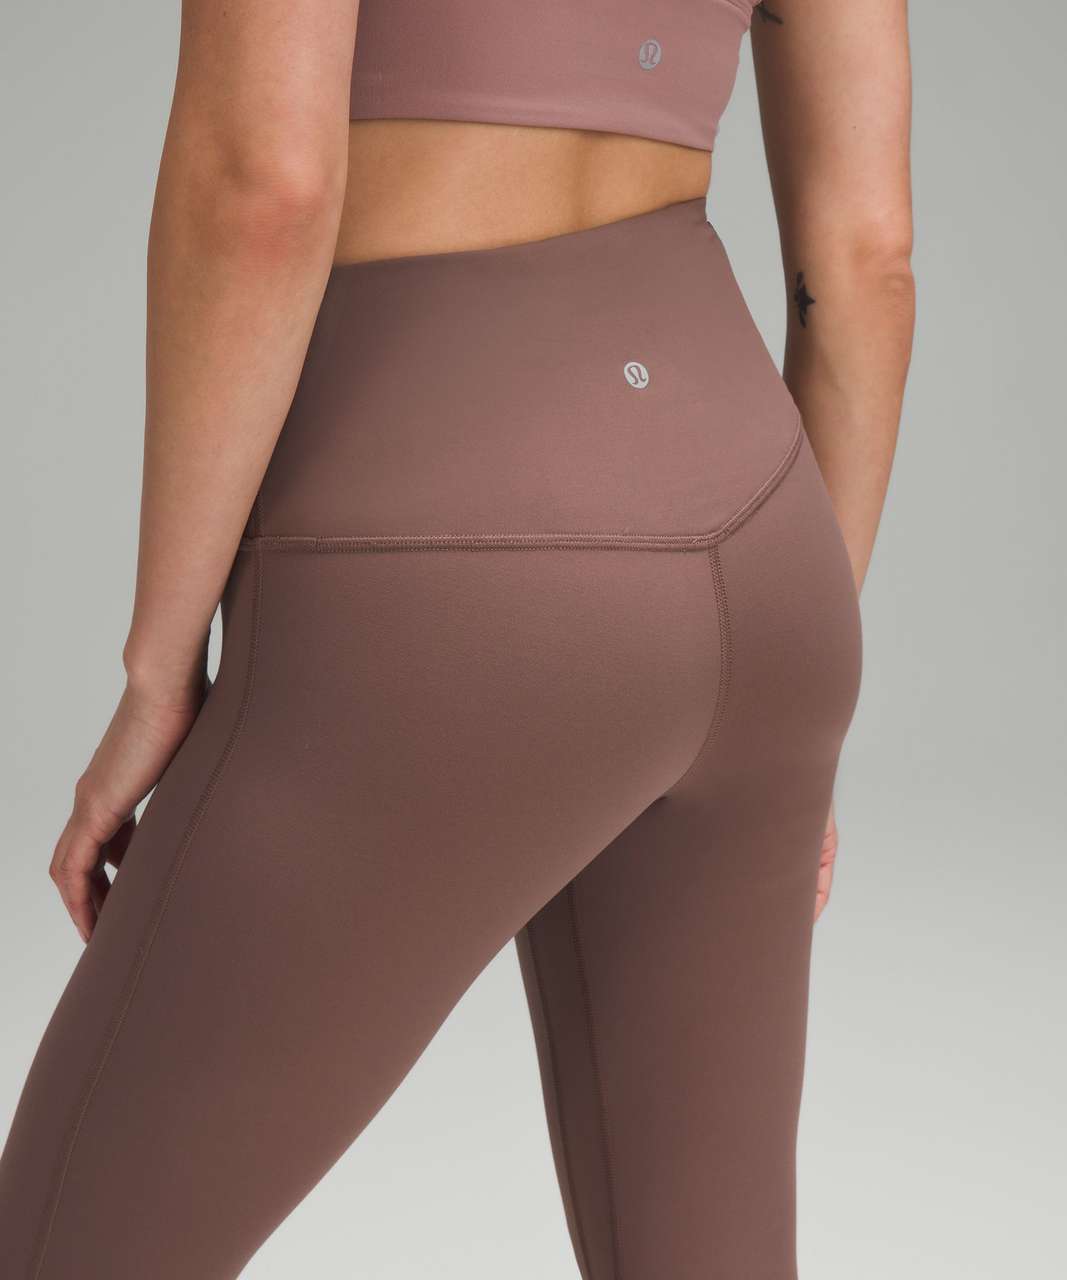 Align Mini Flares 28 - thoughts from a mid size girly with calves : r/ lululemon